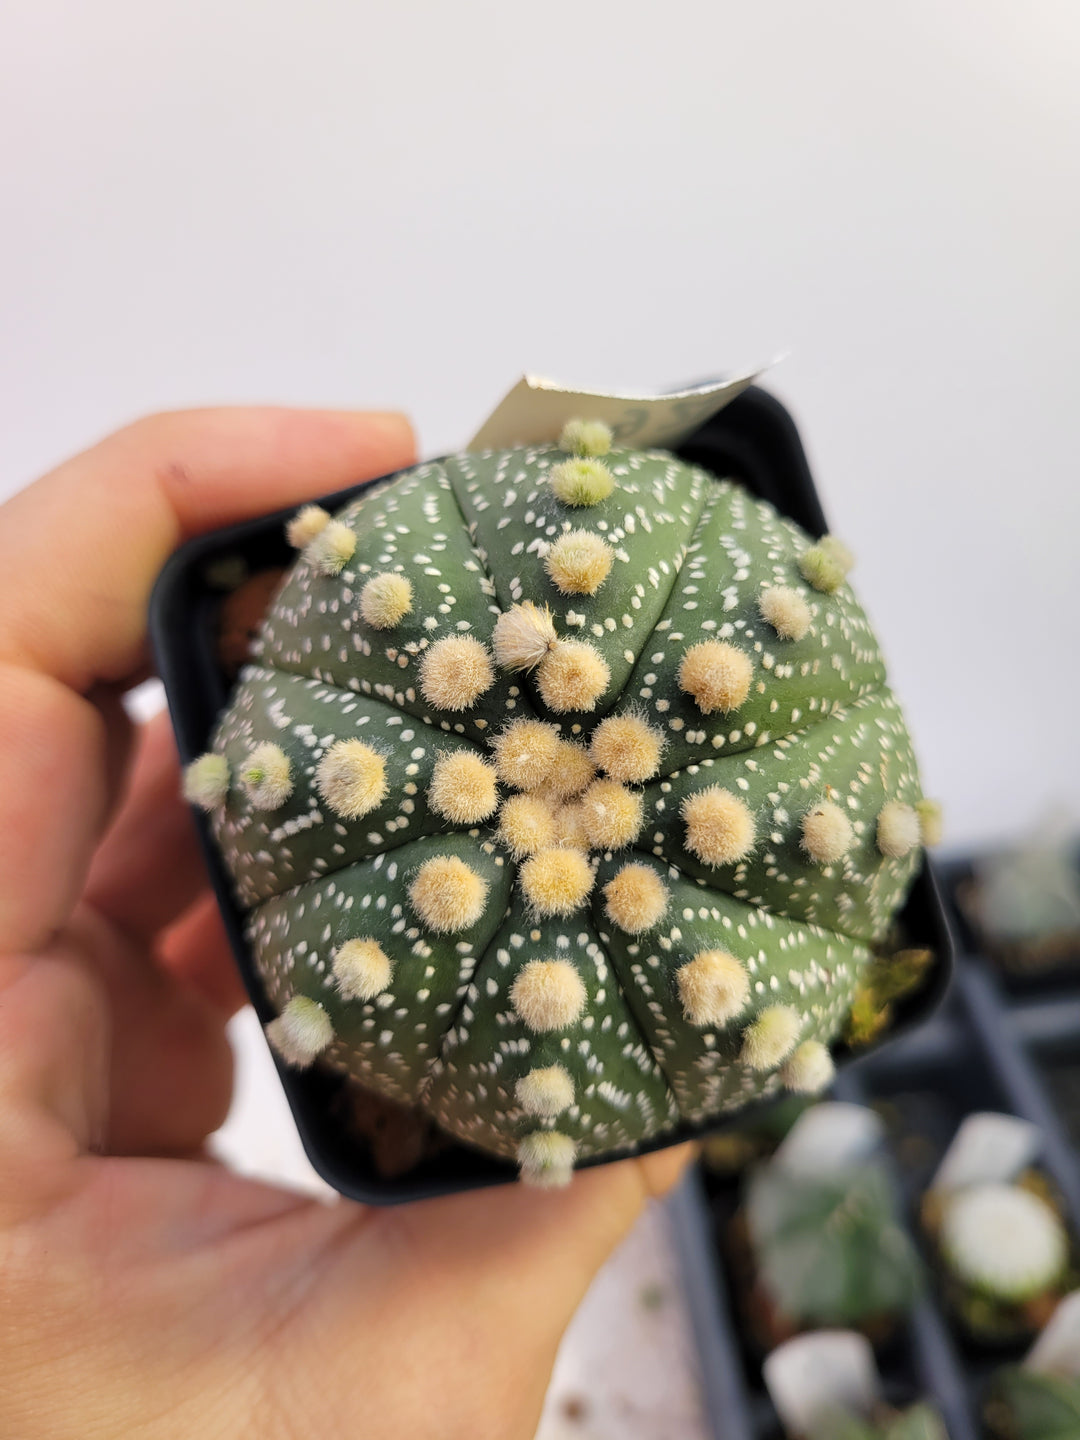 Astrophytum asterias cv. Superkabuto, rooted and established Deaw Cactus- Flowering Seed Grown#T26 - Nice Plants Good Pots